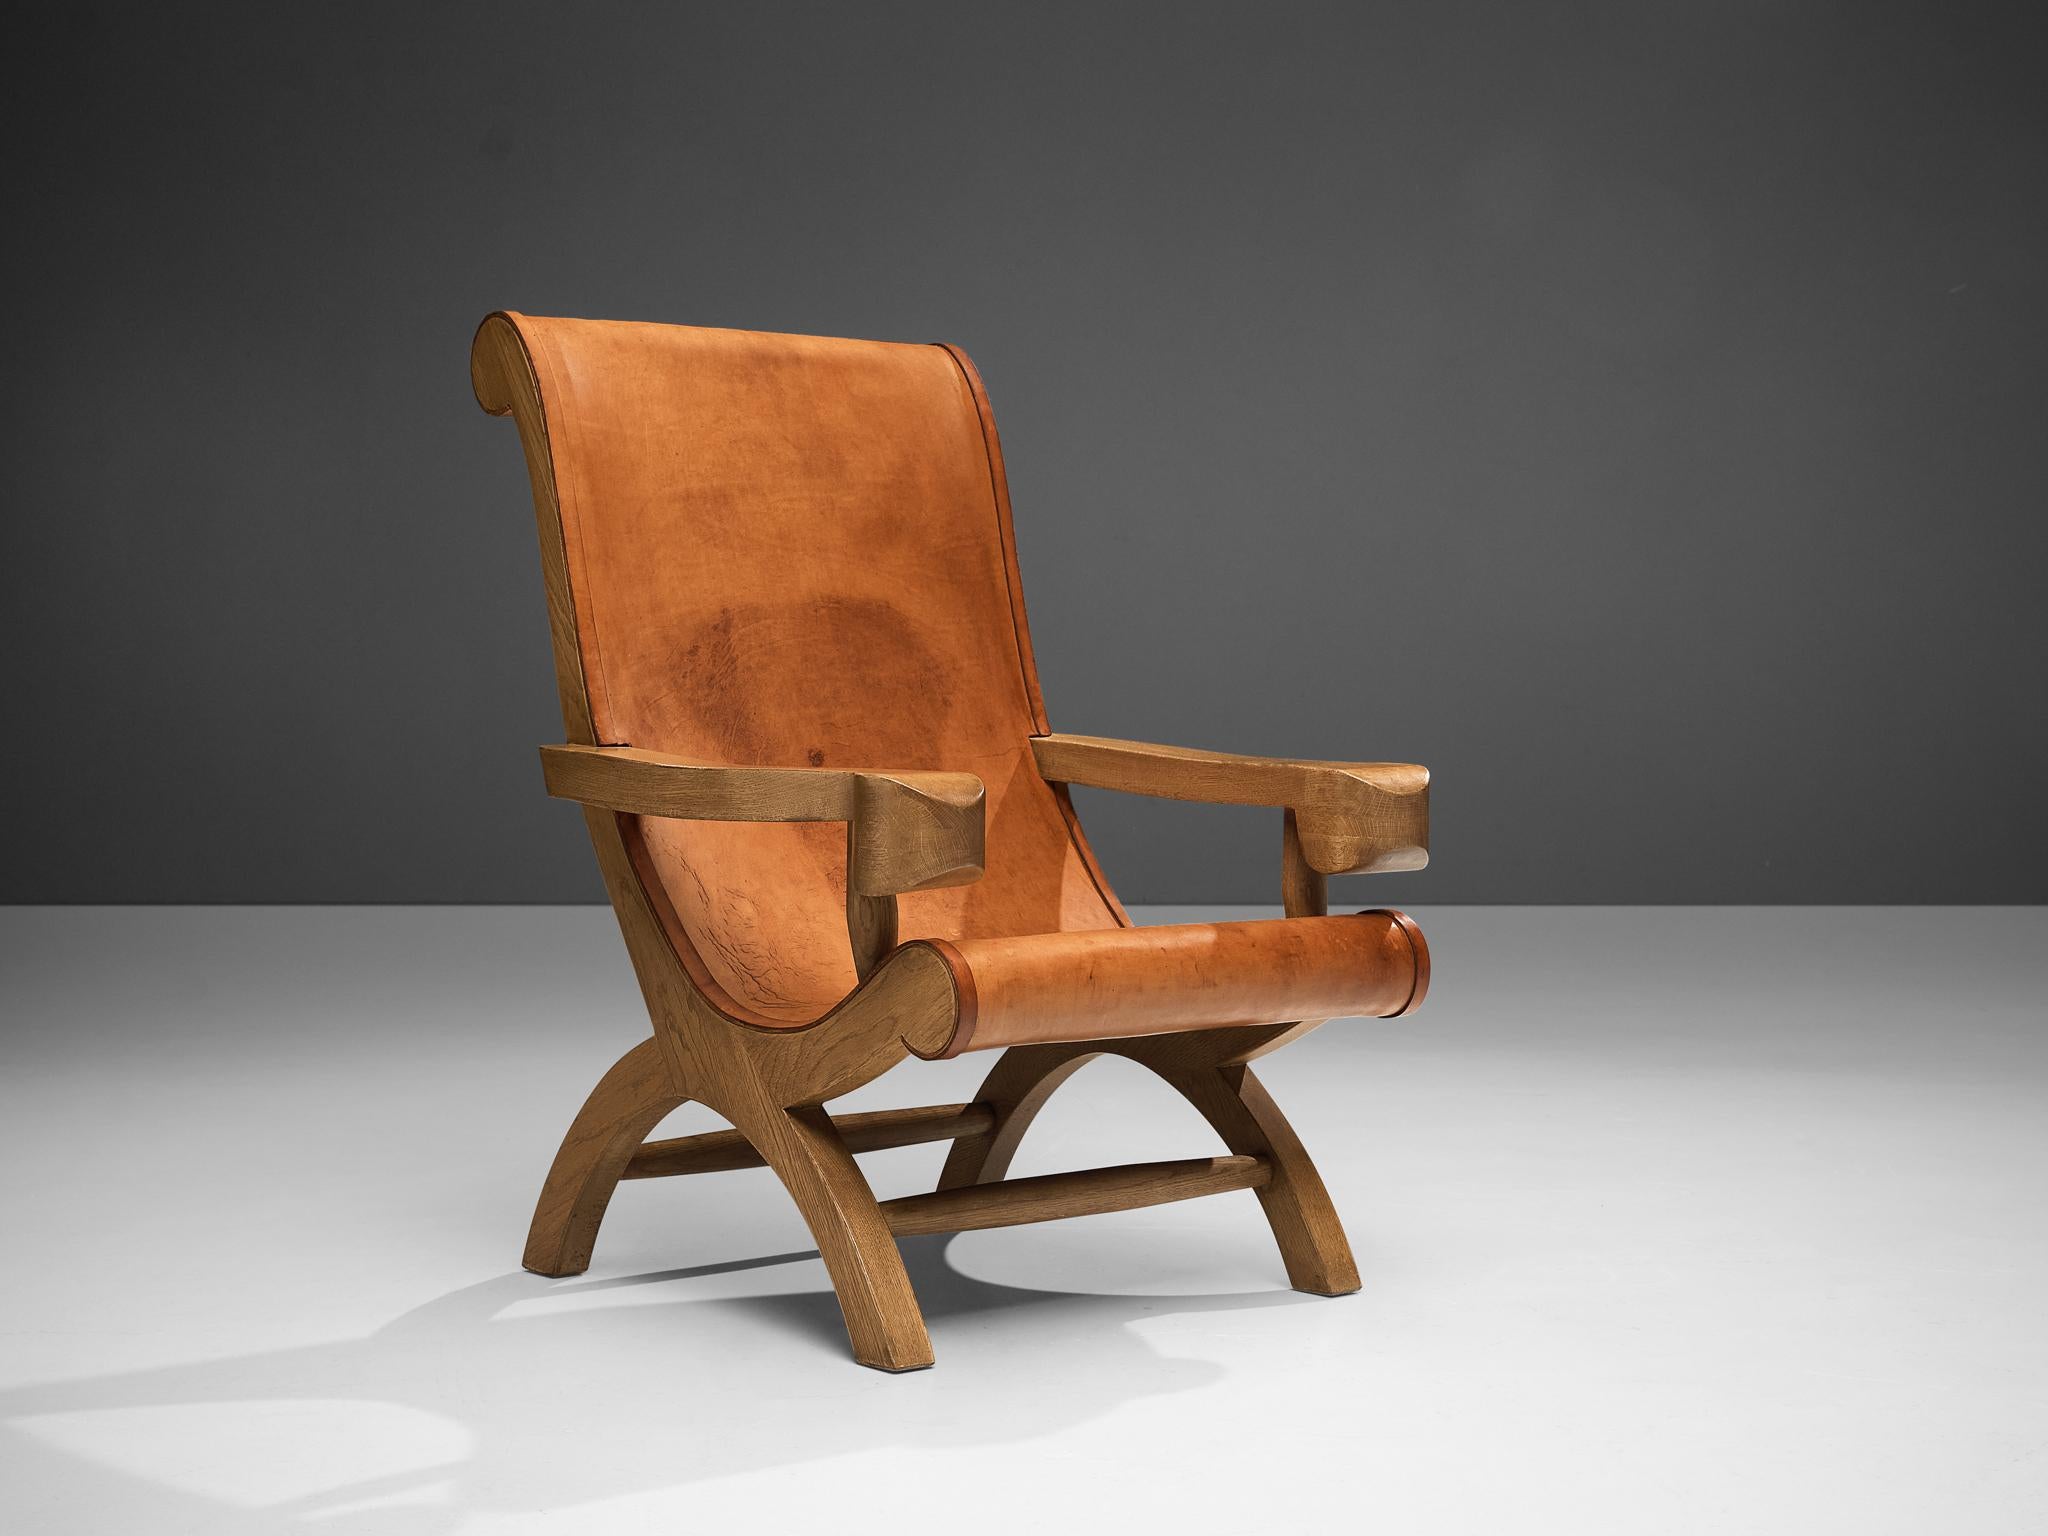 Attributed to Clara Porset, 'Butaque' armchair, leather and cypress wood, Mexico, circa 1947.

Beautiful lounge chair attrributed to Clara Porset. This chair has an exotic look, due to Porset's combination of Modern design with Mexican